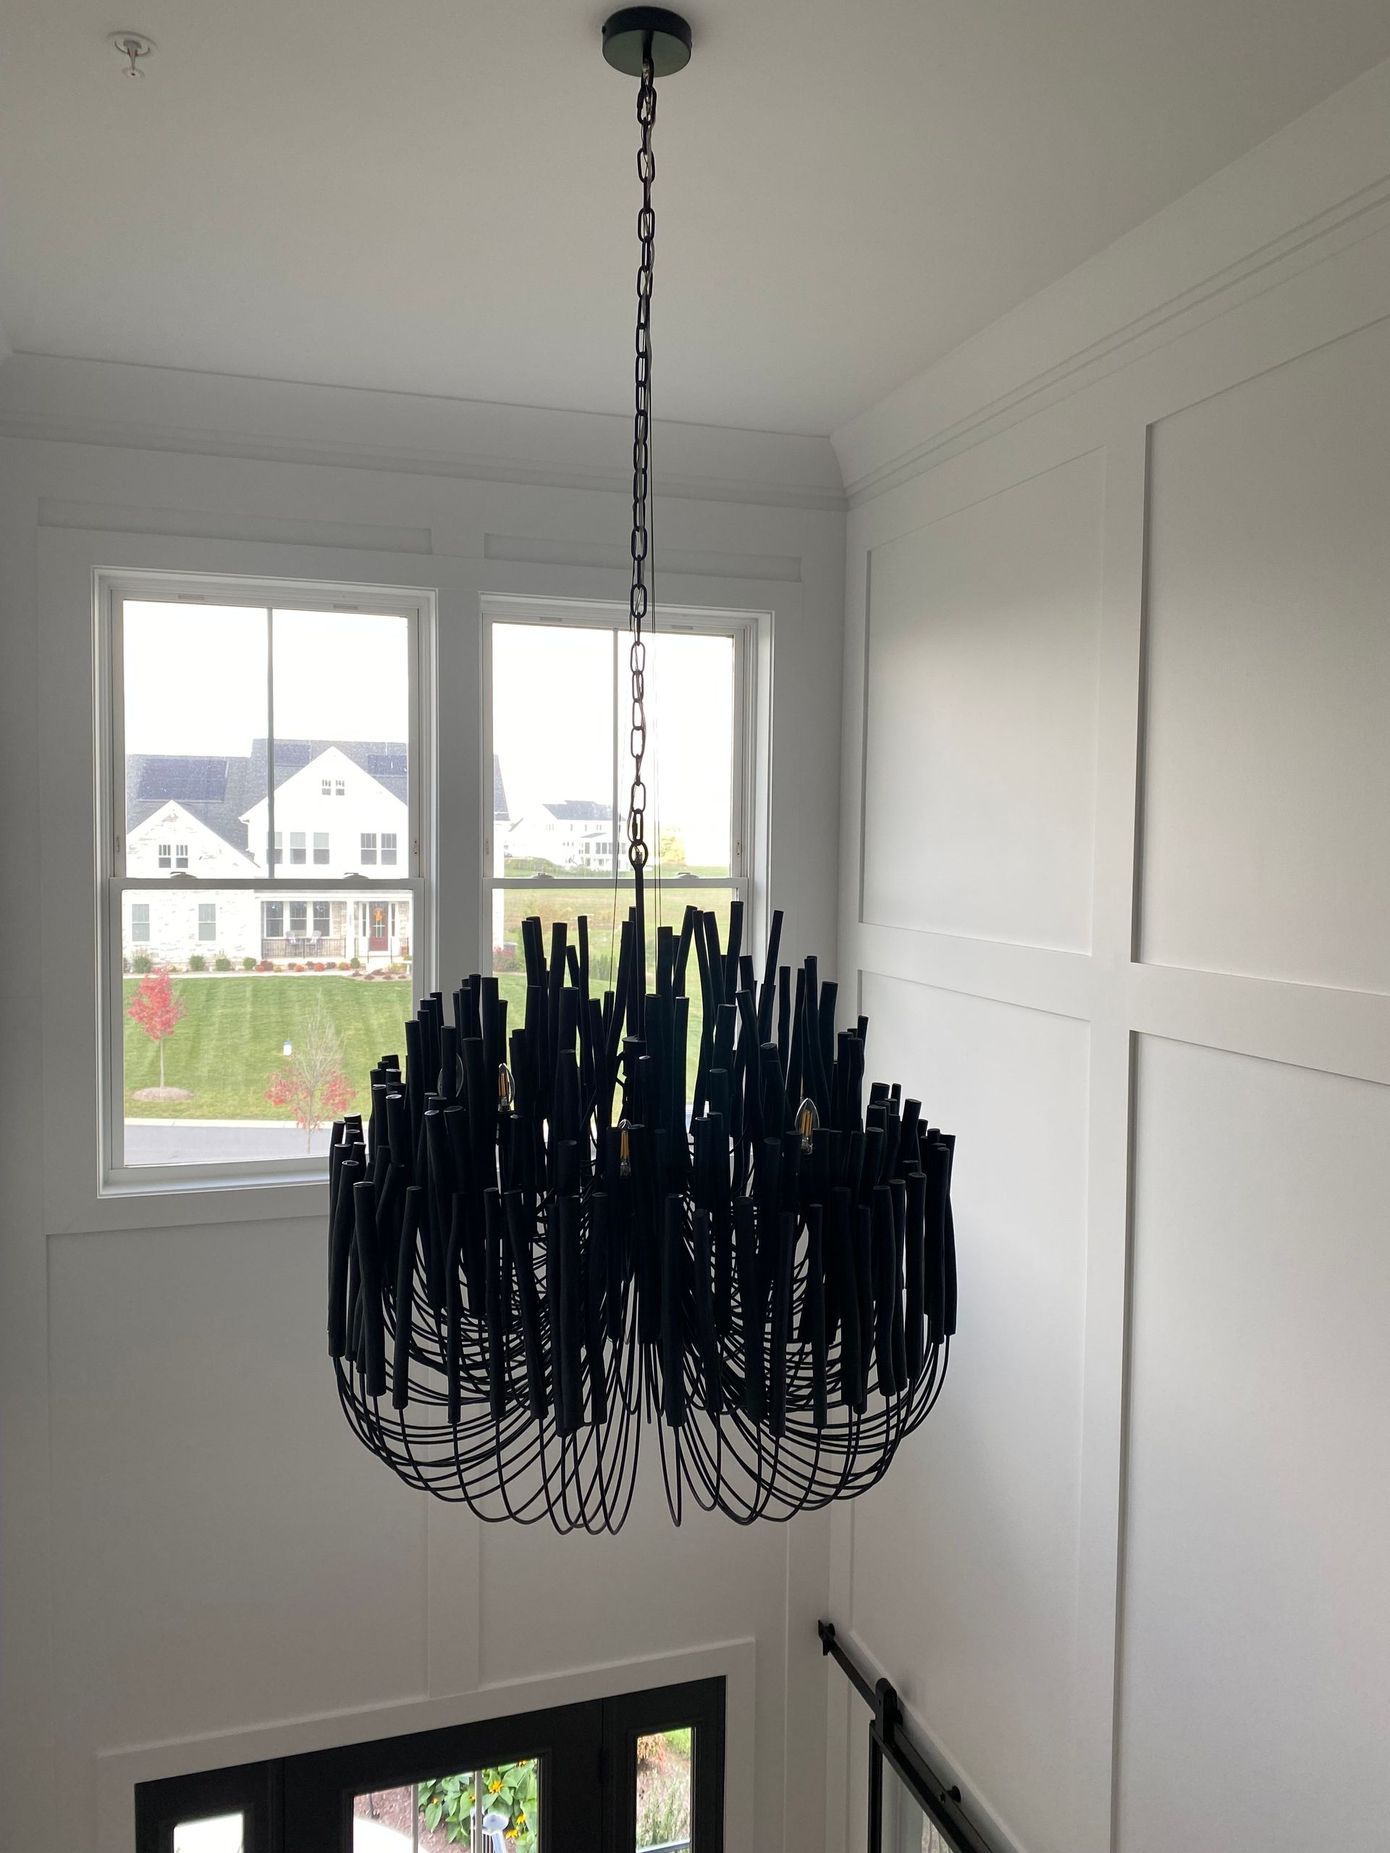 A black chandelier is hanging from the ceiling in a room with a window.